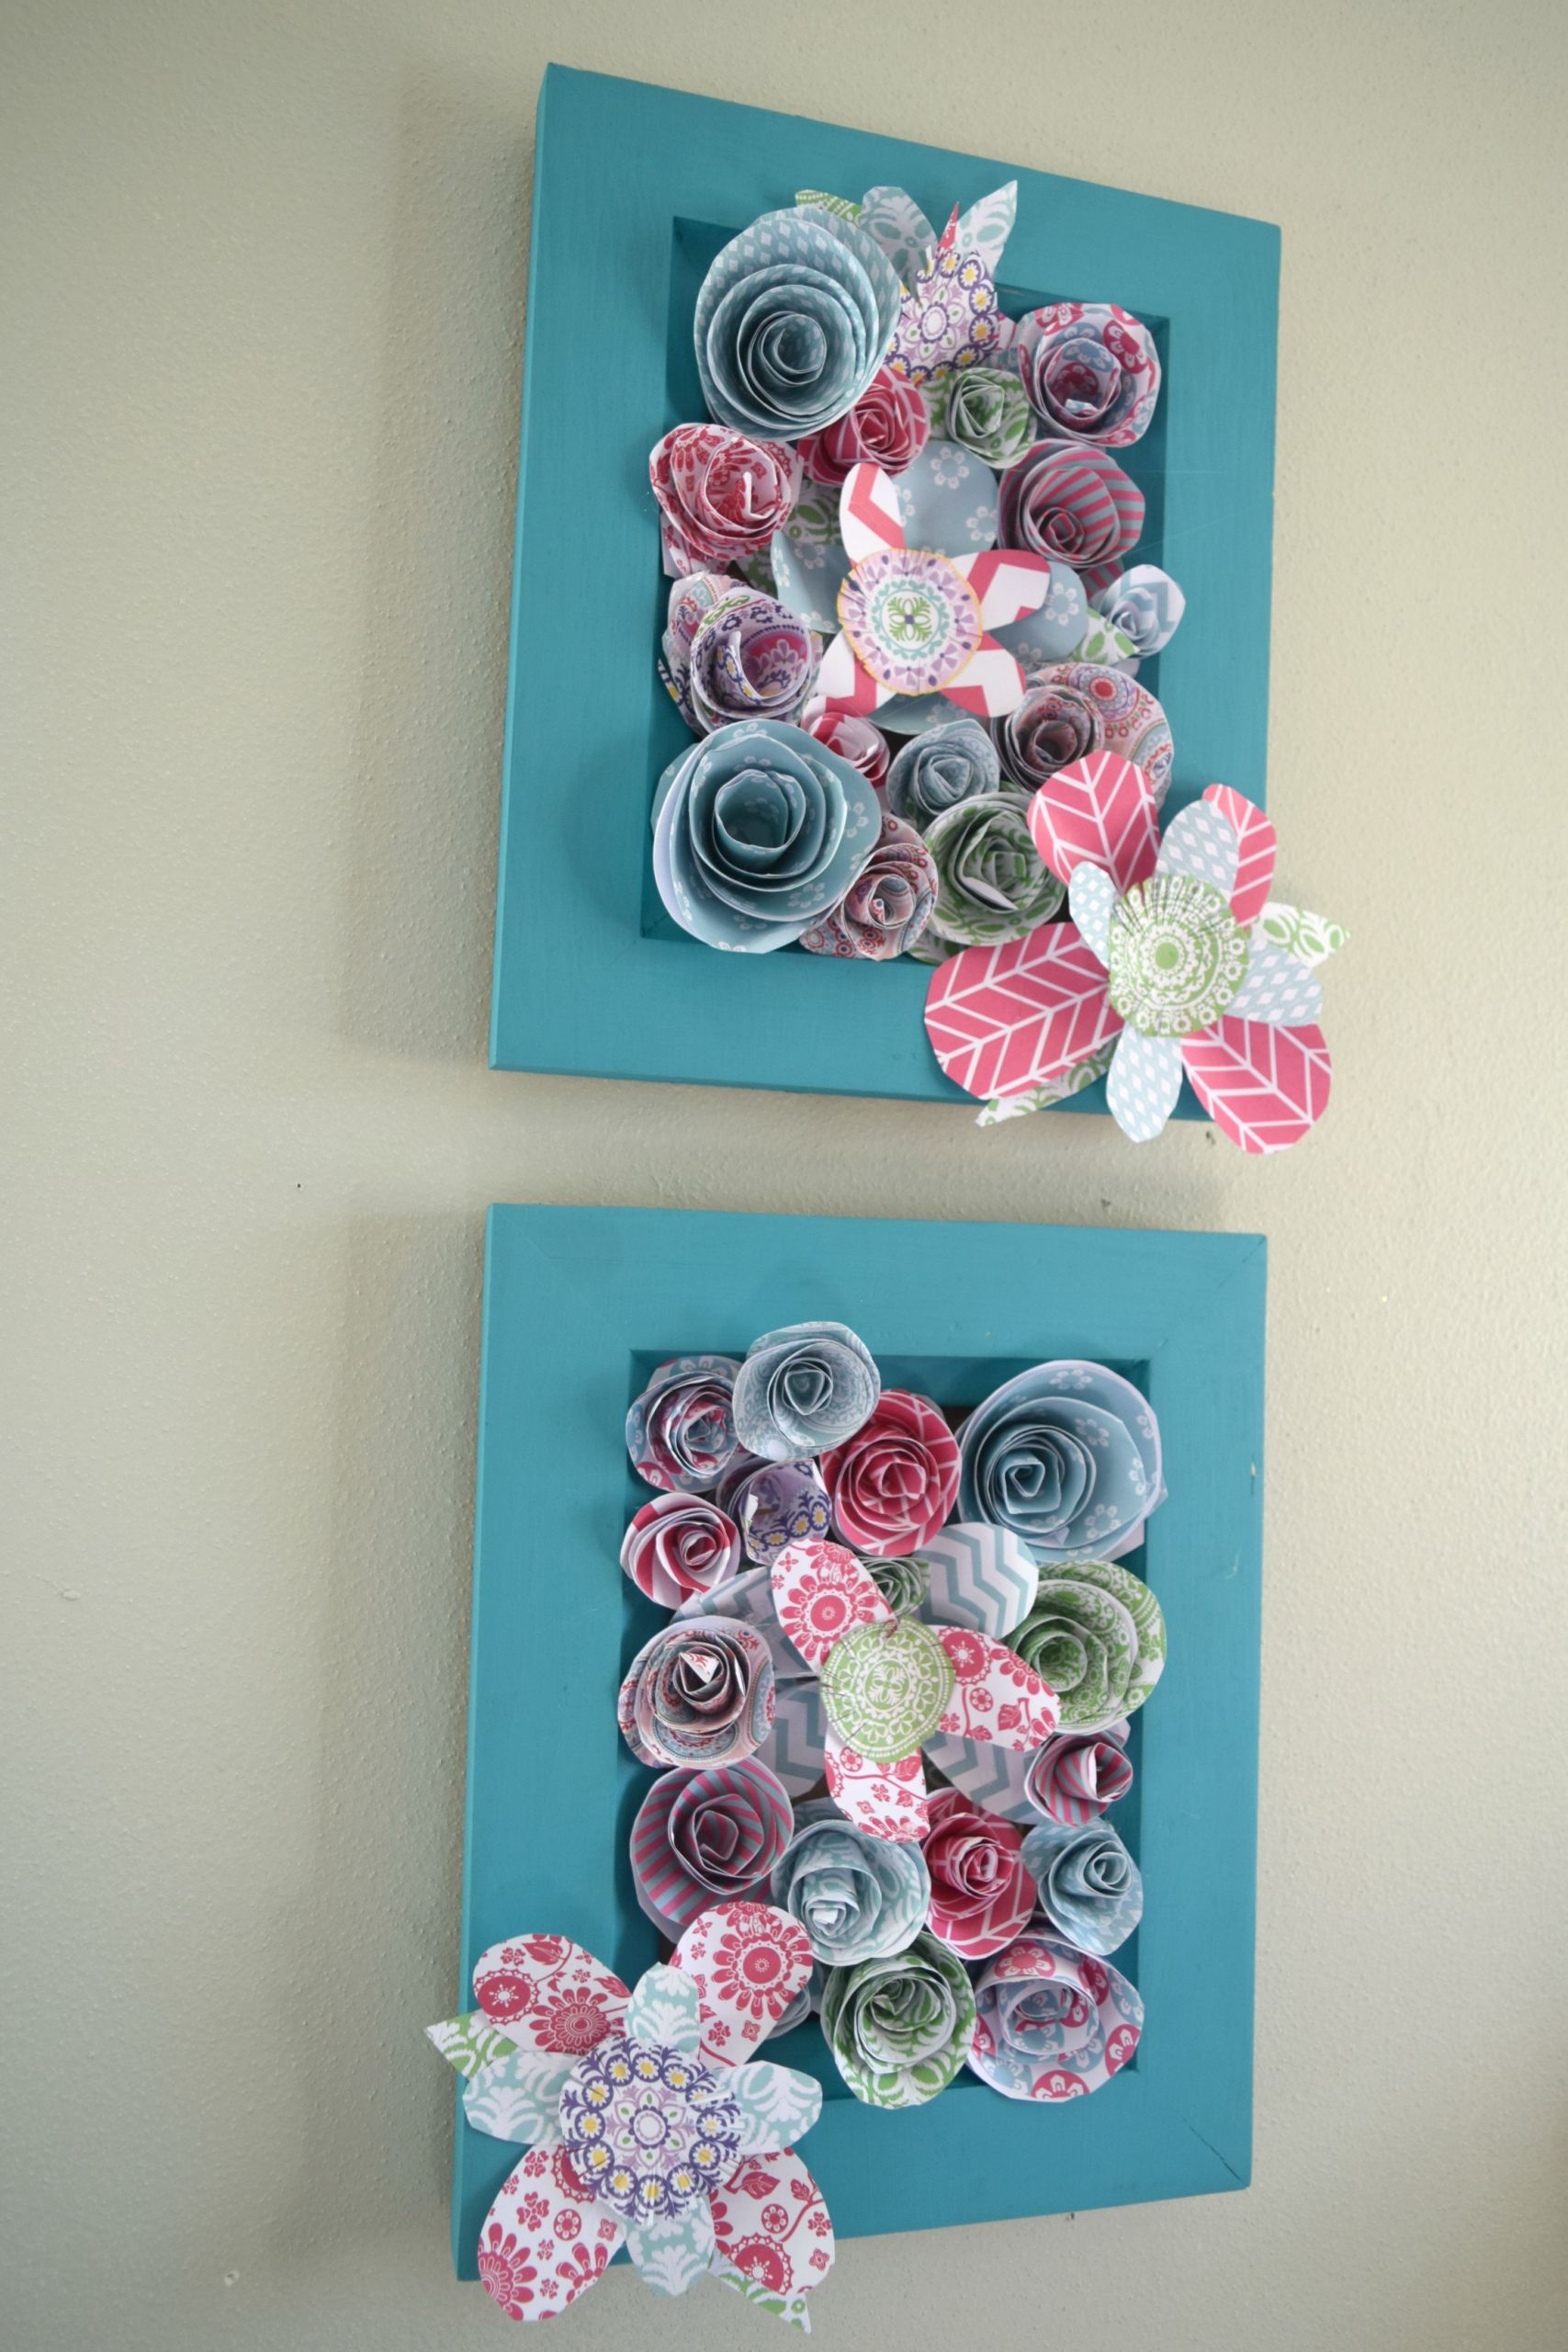 Girl Bedroom Wall Art
 How to make wall art using paper flowers • Our House Now a